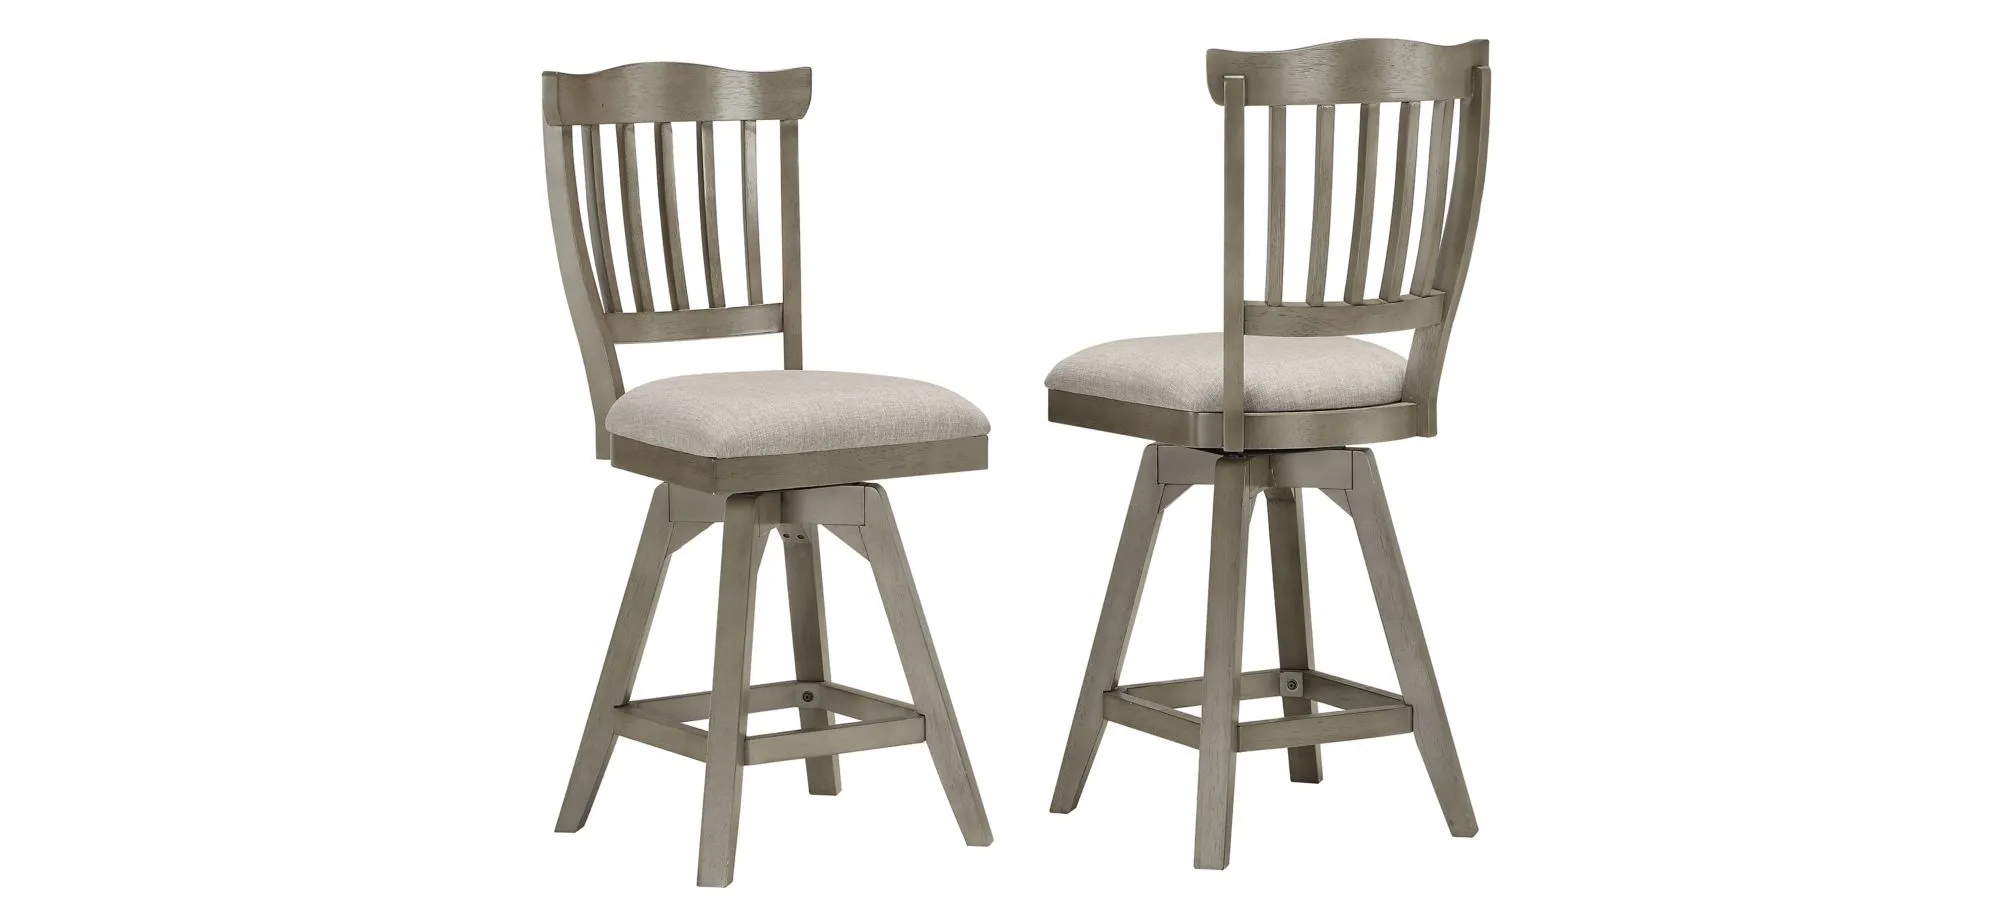 Pine Crest Tulip Counter Stool - Set of 2 in Burnished Gray by ECI